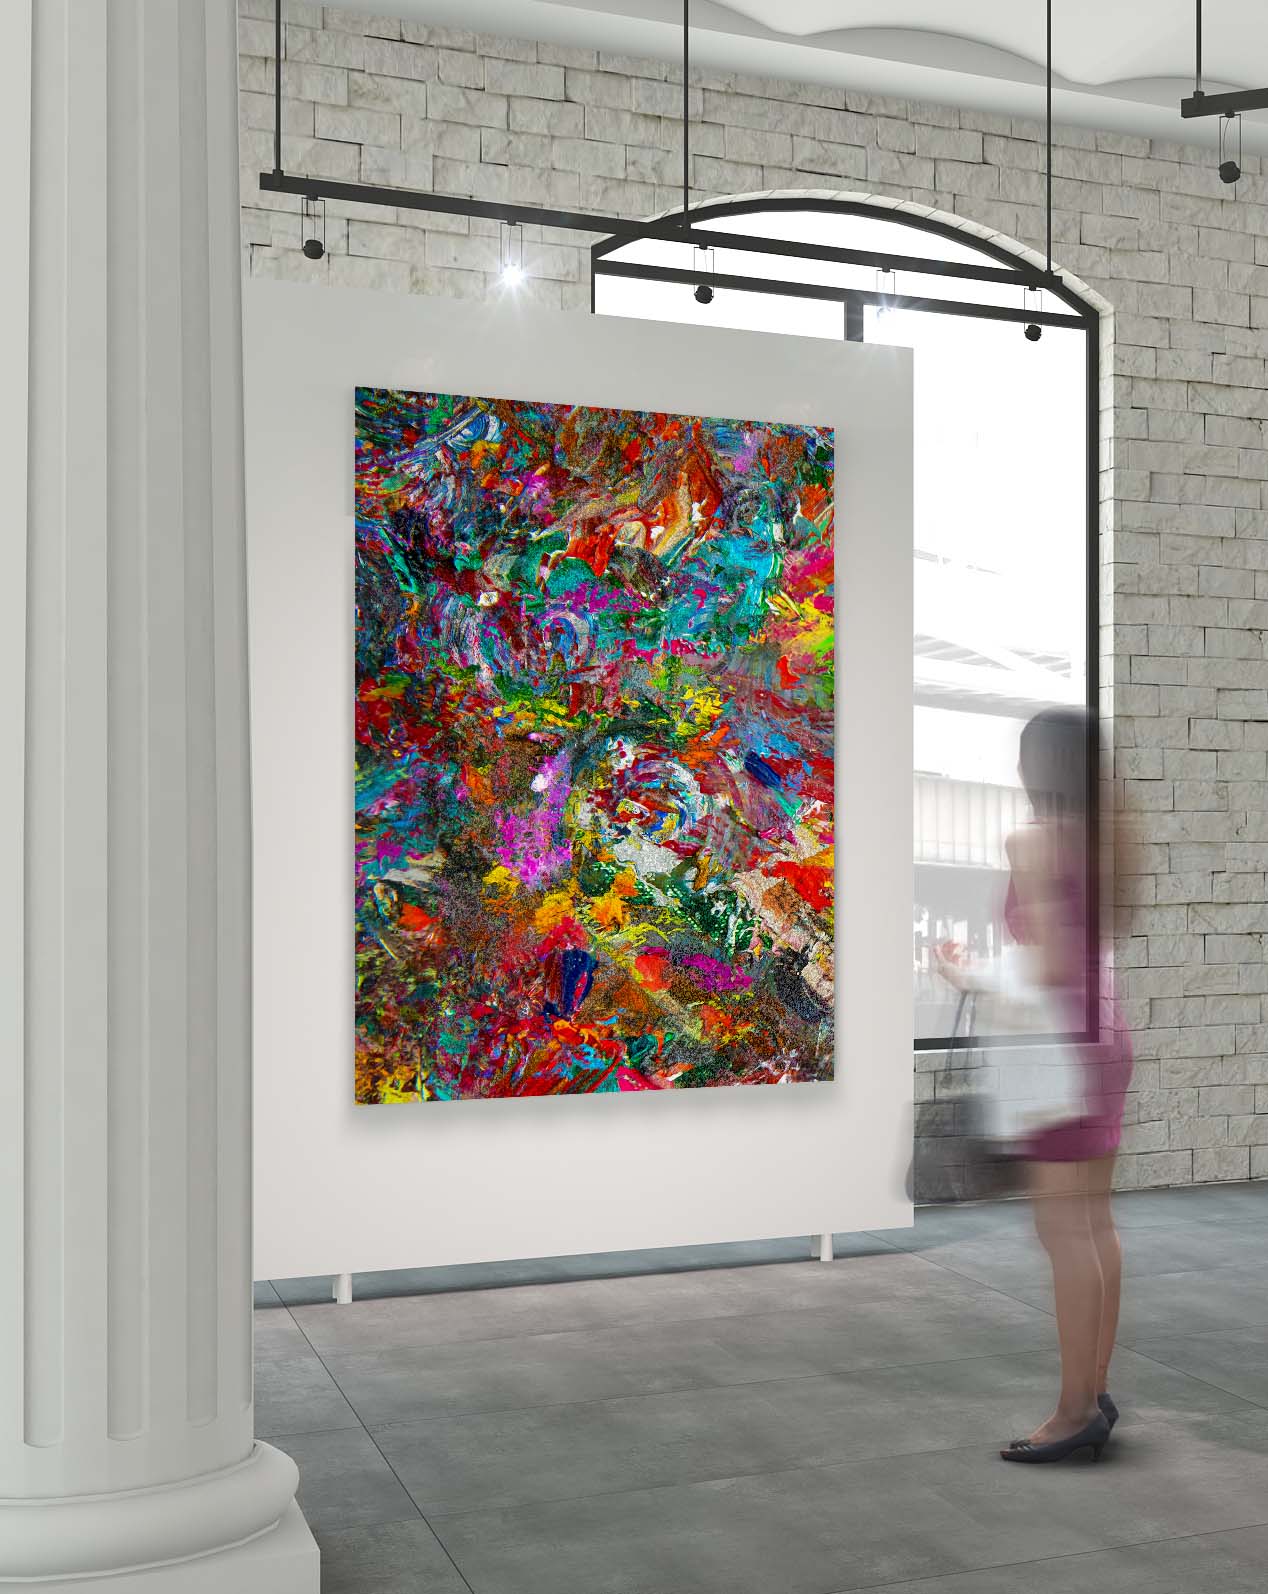  Vid19-72B Abstract Art  large print in a art gallery